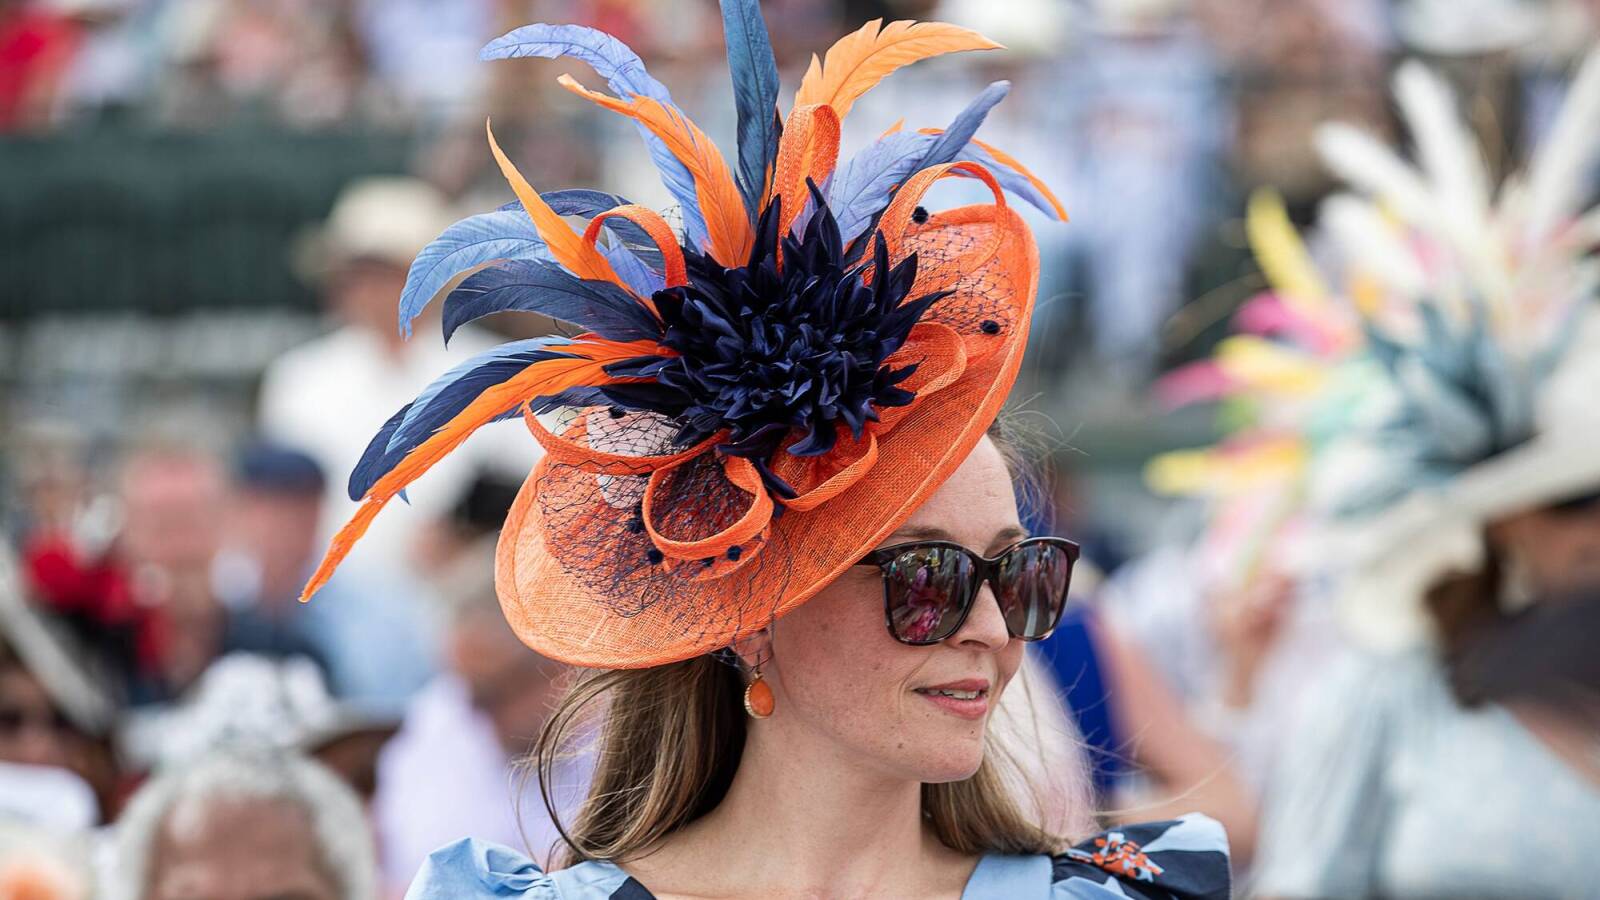 Big hats take center stage at the Kentucky Derby - TrendRadars